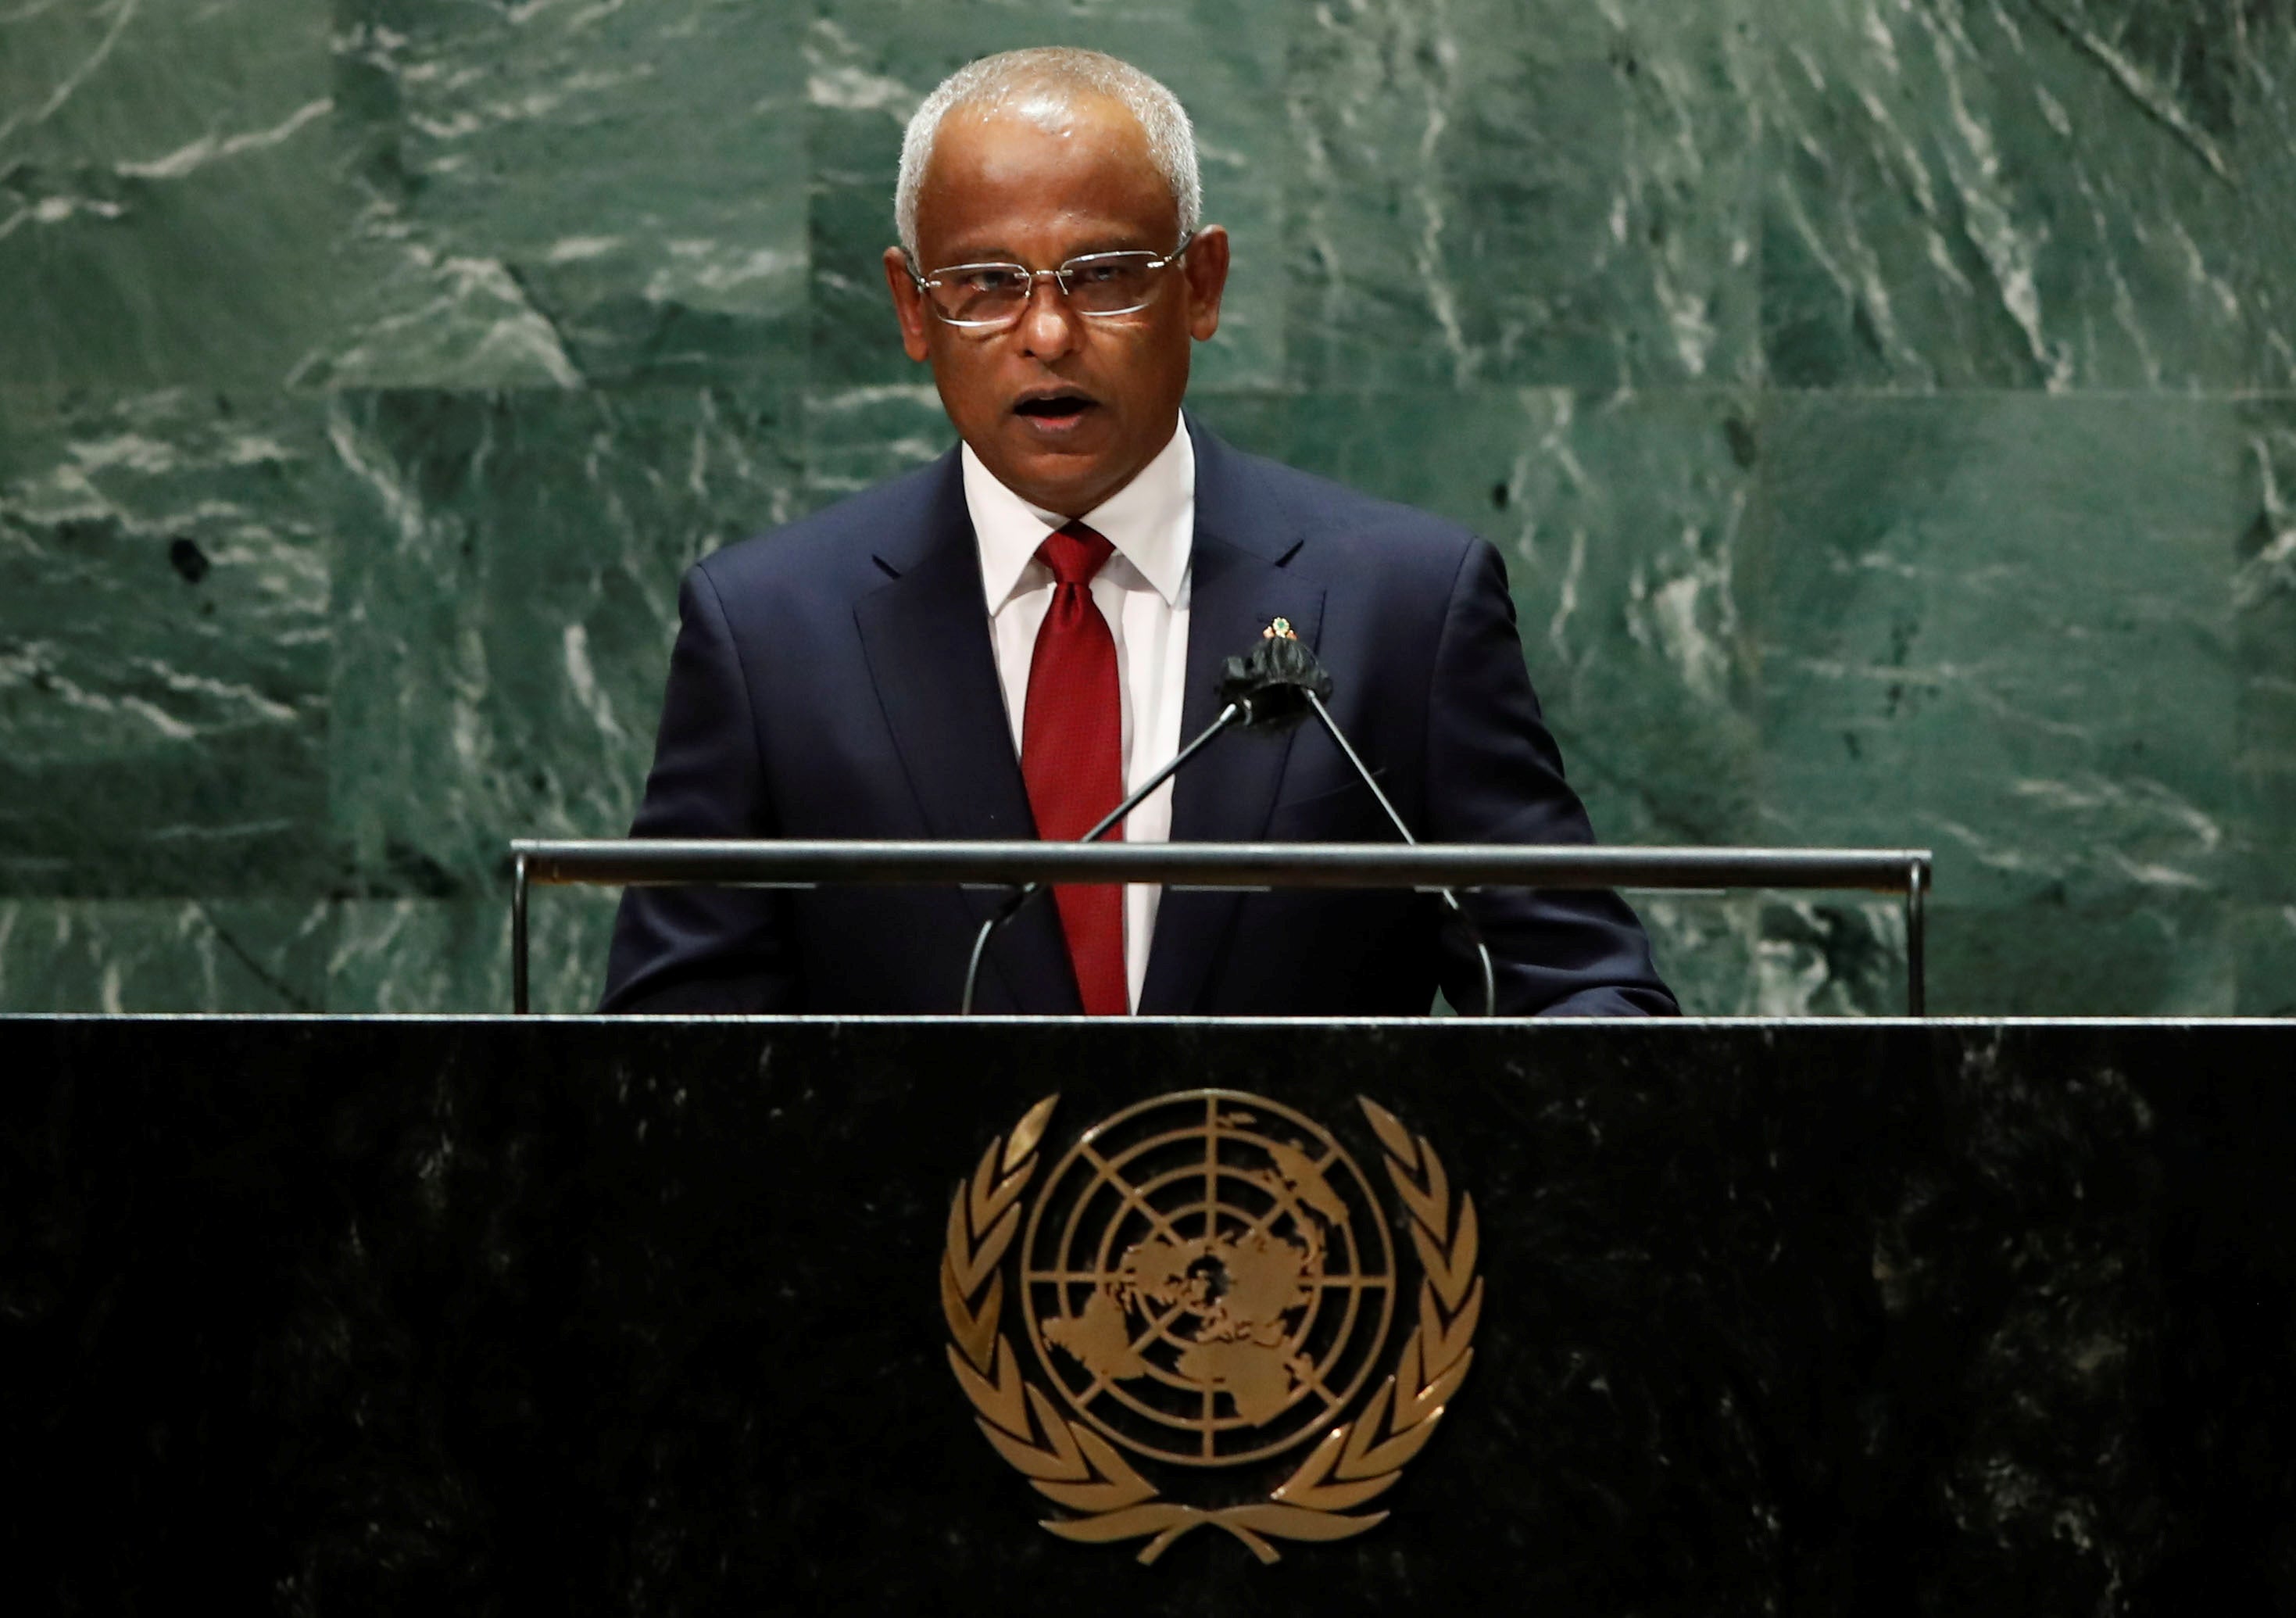 Maldives President Ibrahim Mohamed Solih addresses the UN General Assembly in New York City.